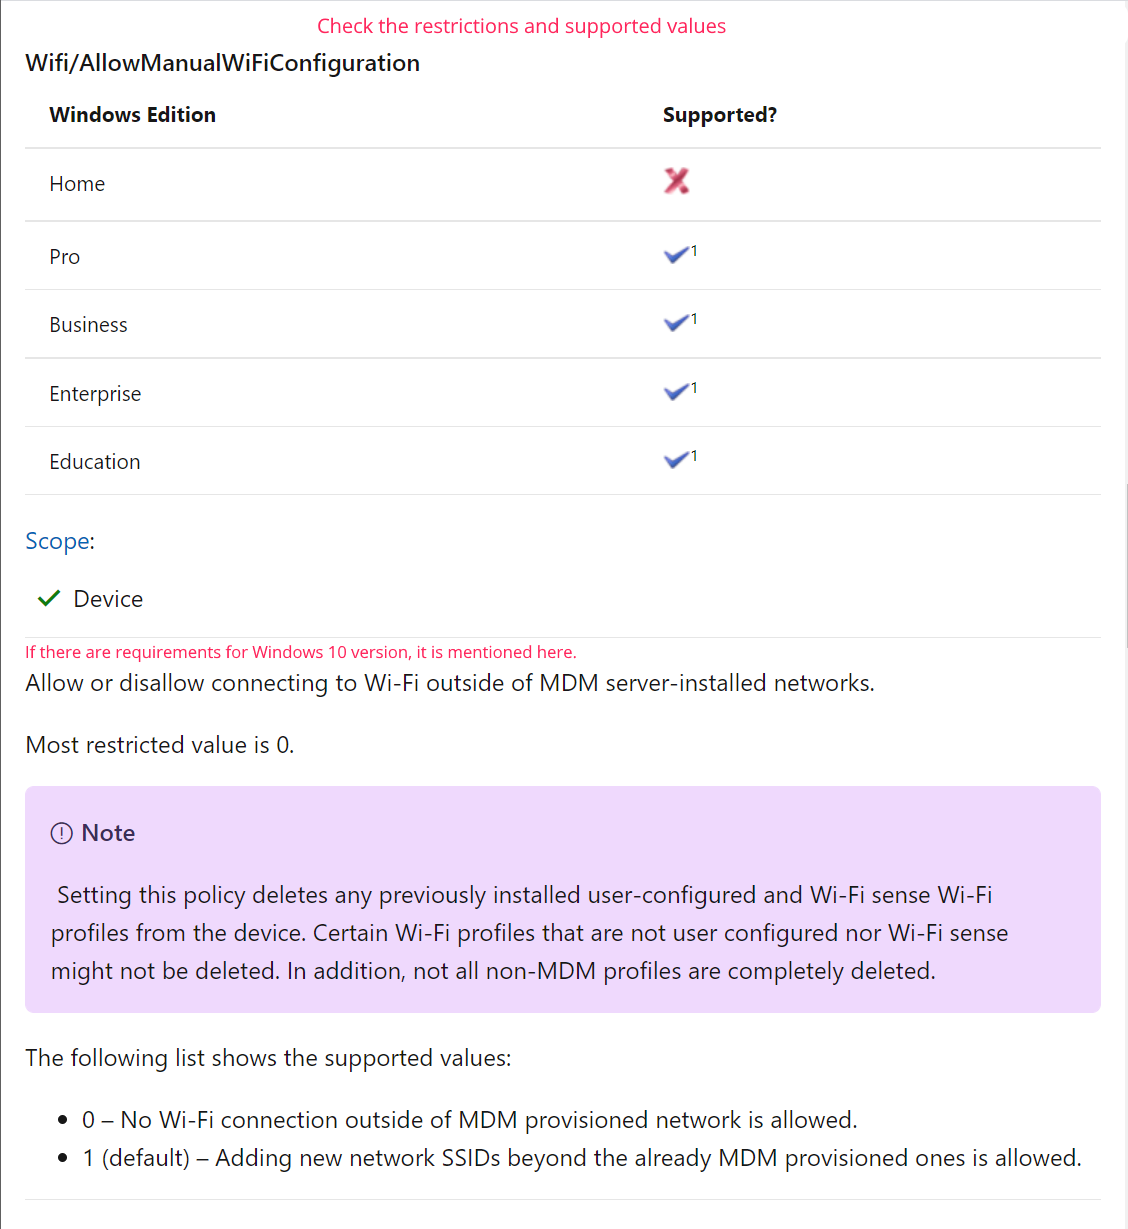 Restrictions and supported values of Windows 10 custom policy